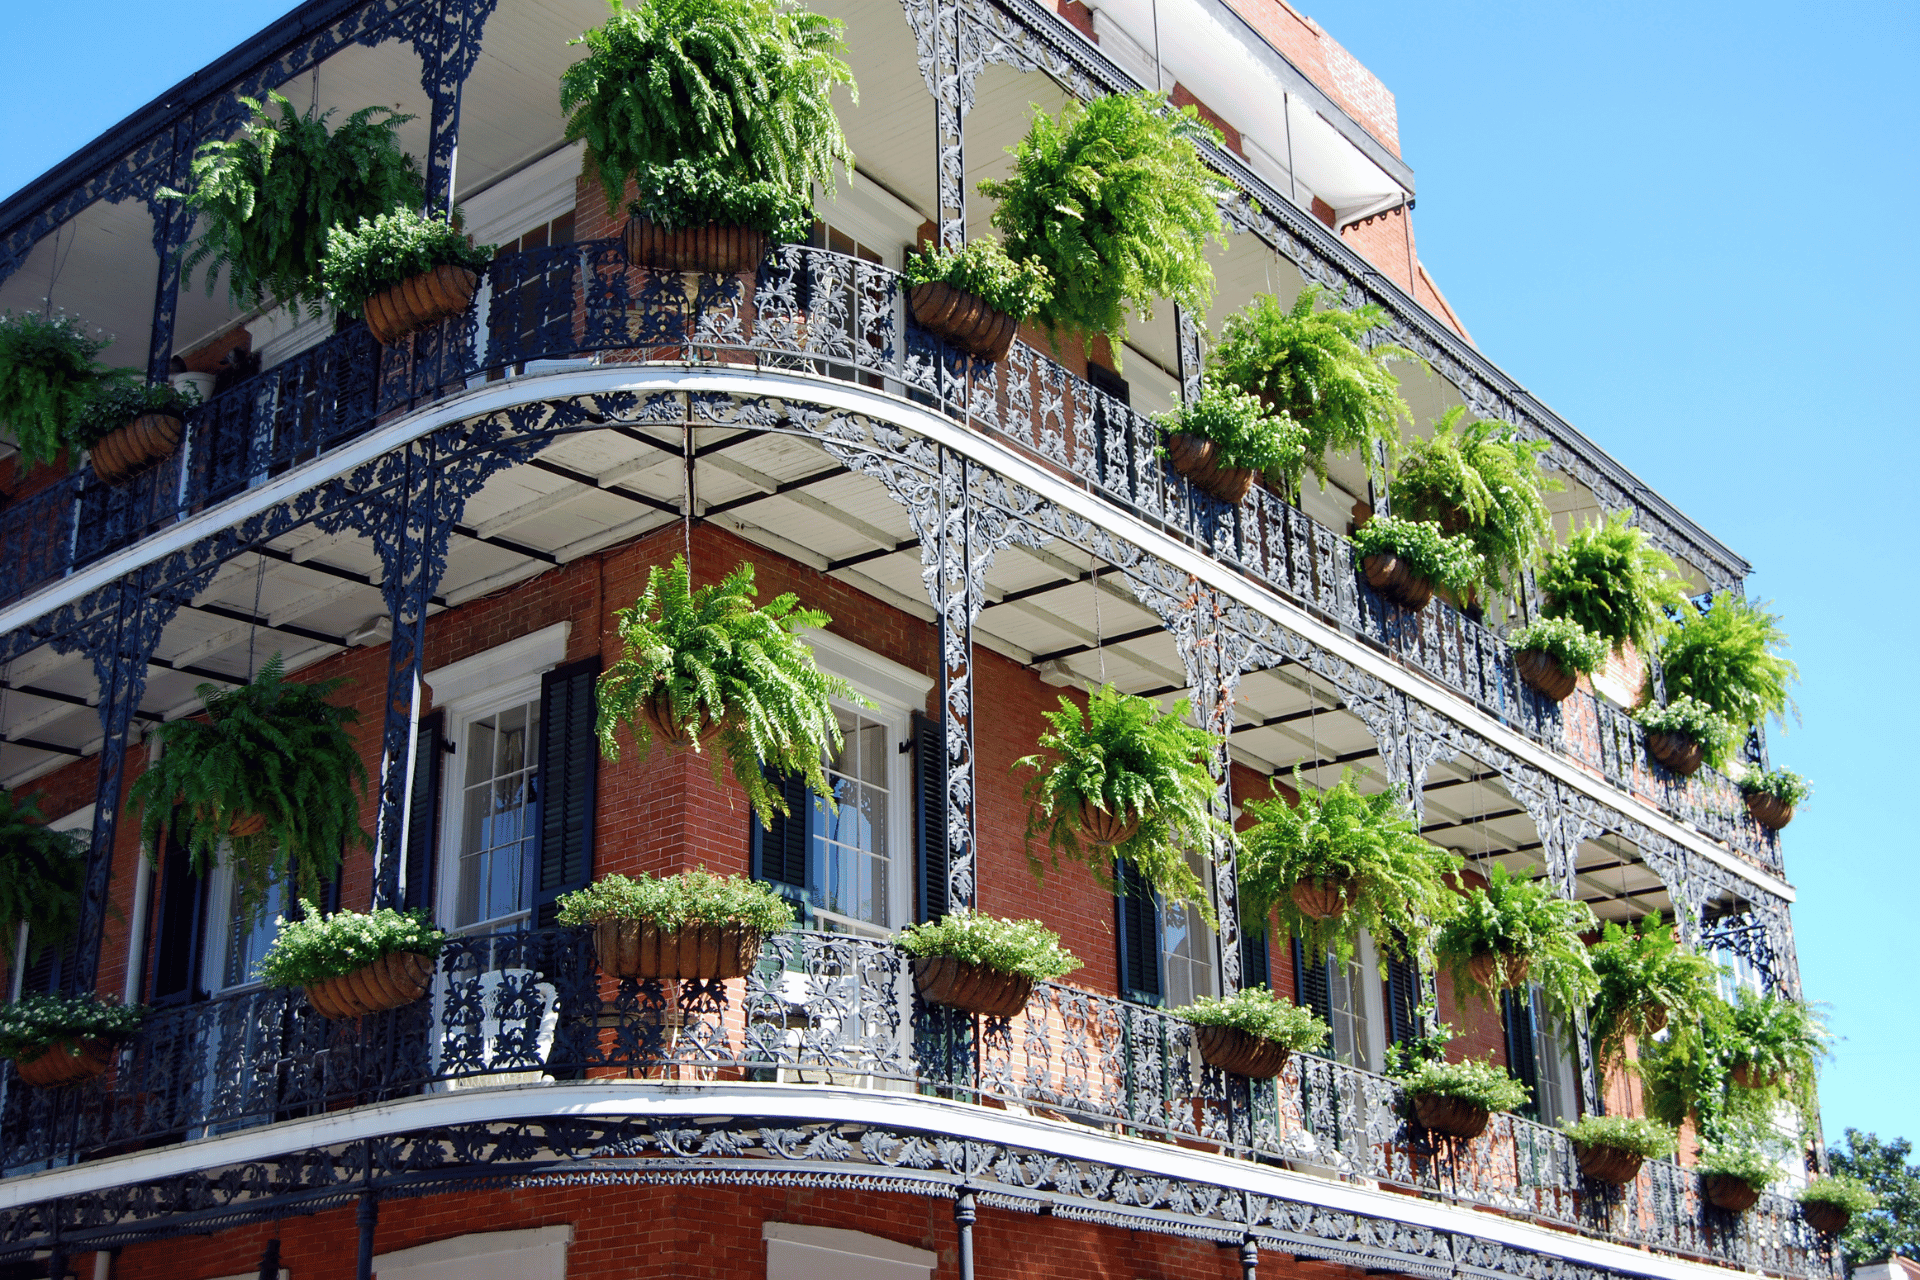 A facade of the streets of New Orleans